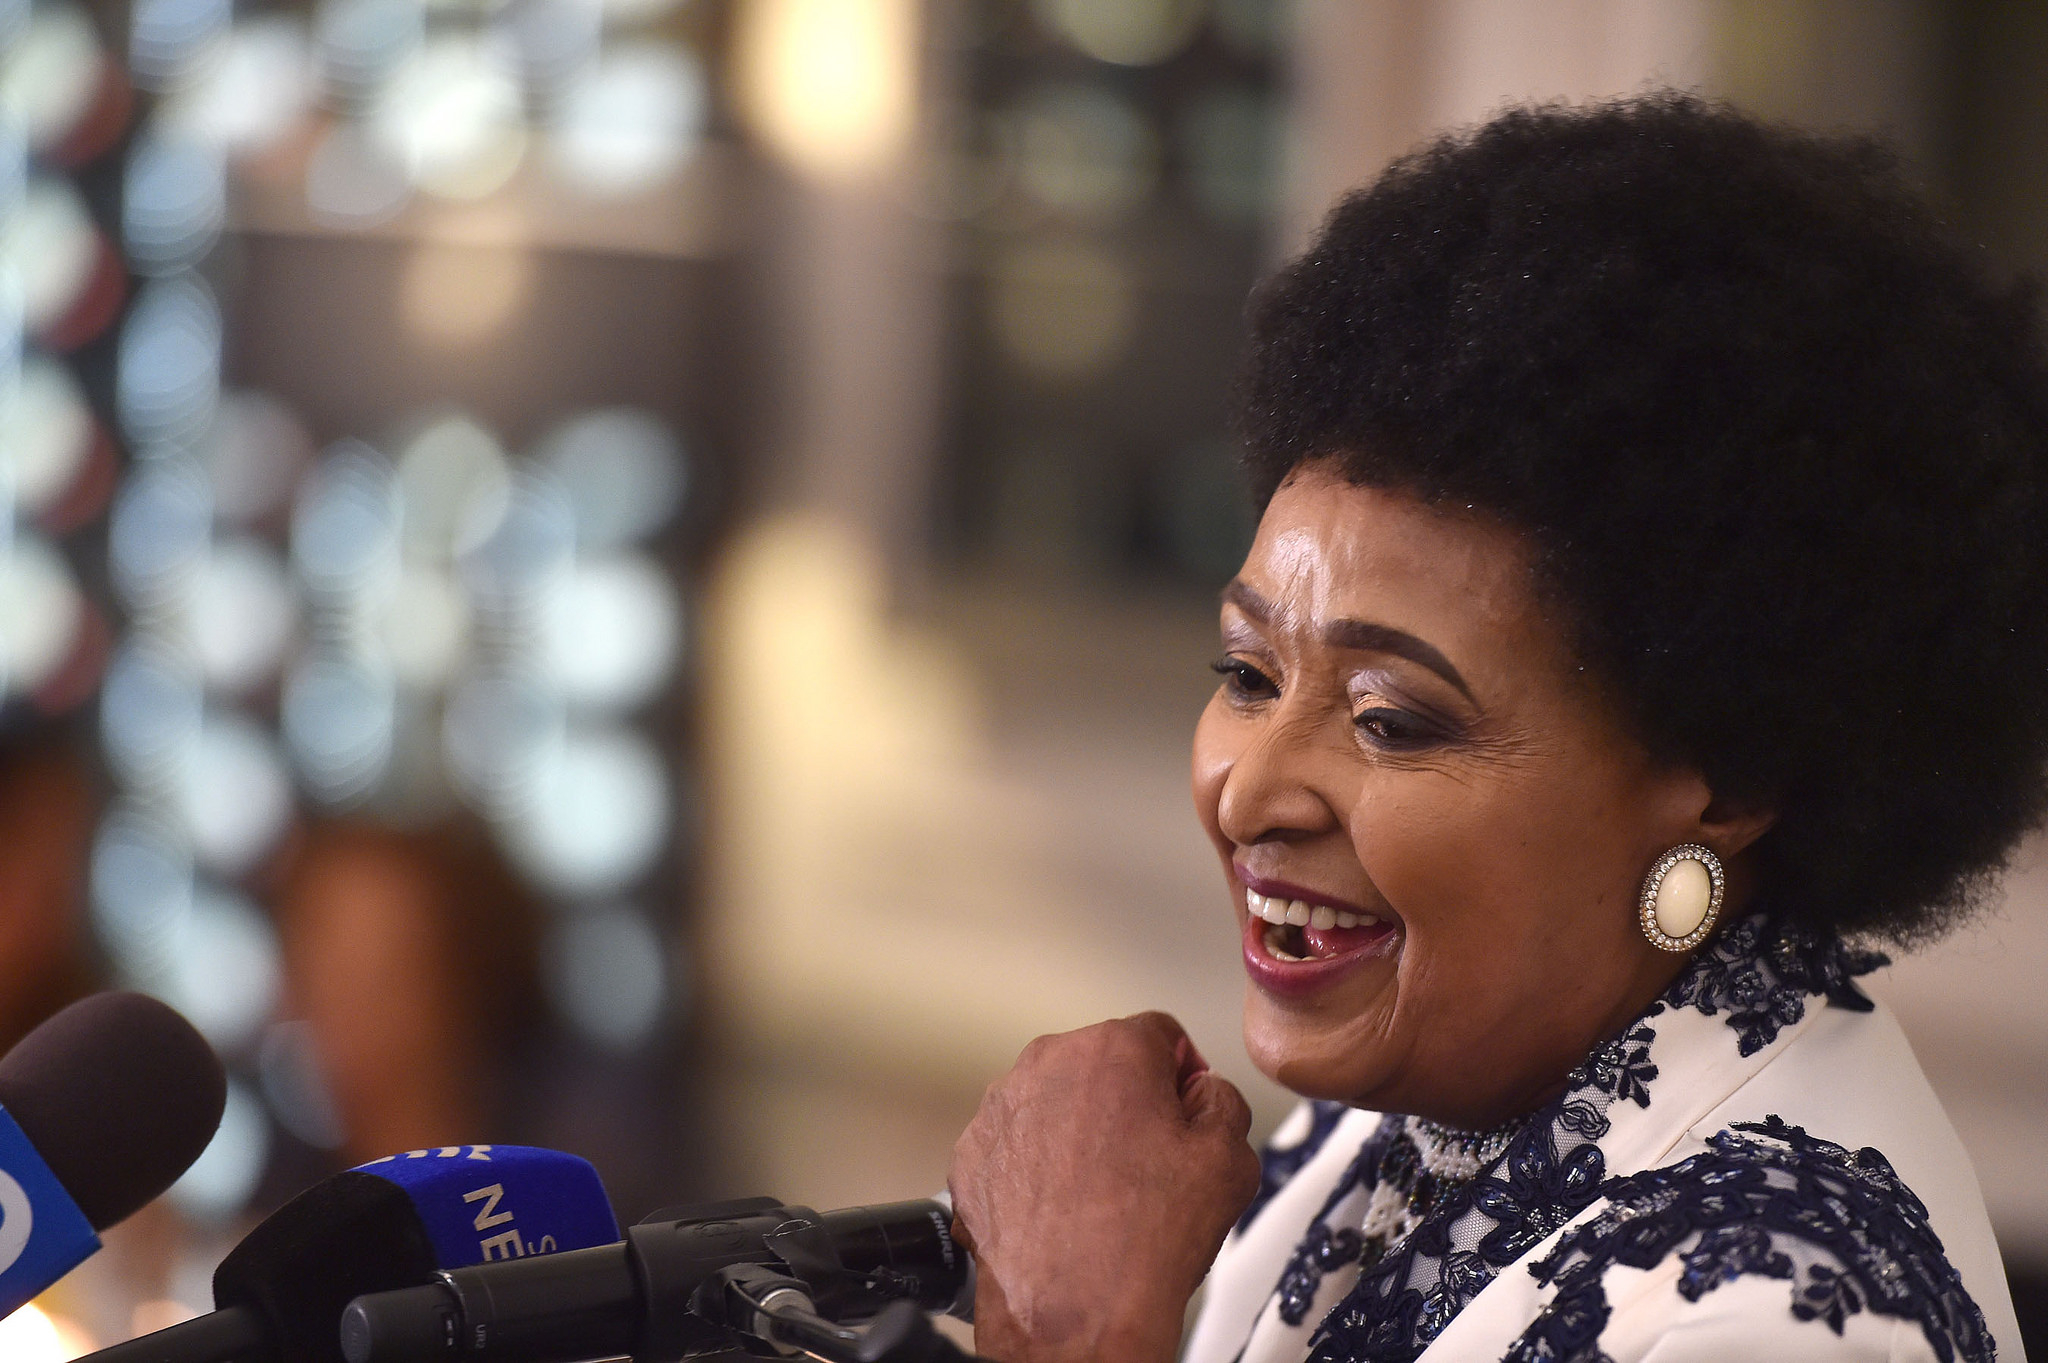 Winnie Madikizela-Mandela at her 80th birthday celebrations held at Mount Nelson Hotel in Cape Town. Photo: GCIS